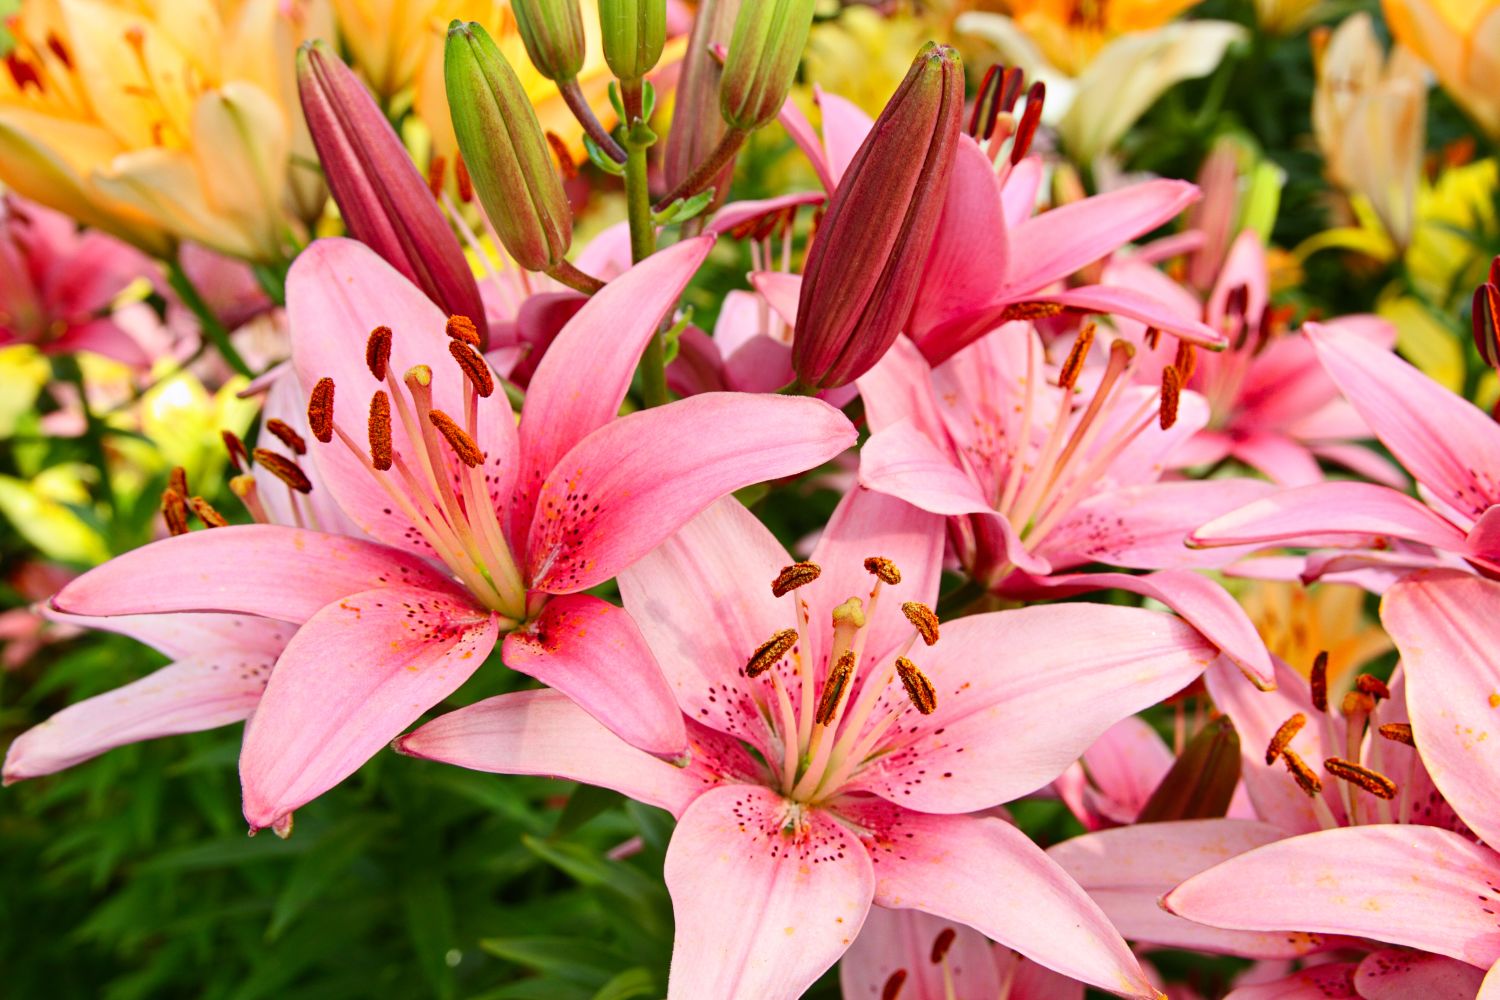 12 Different Types of Purple Lily Cultivars